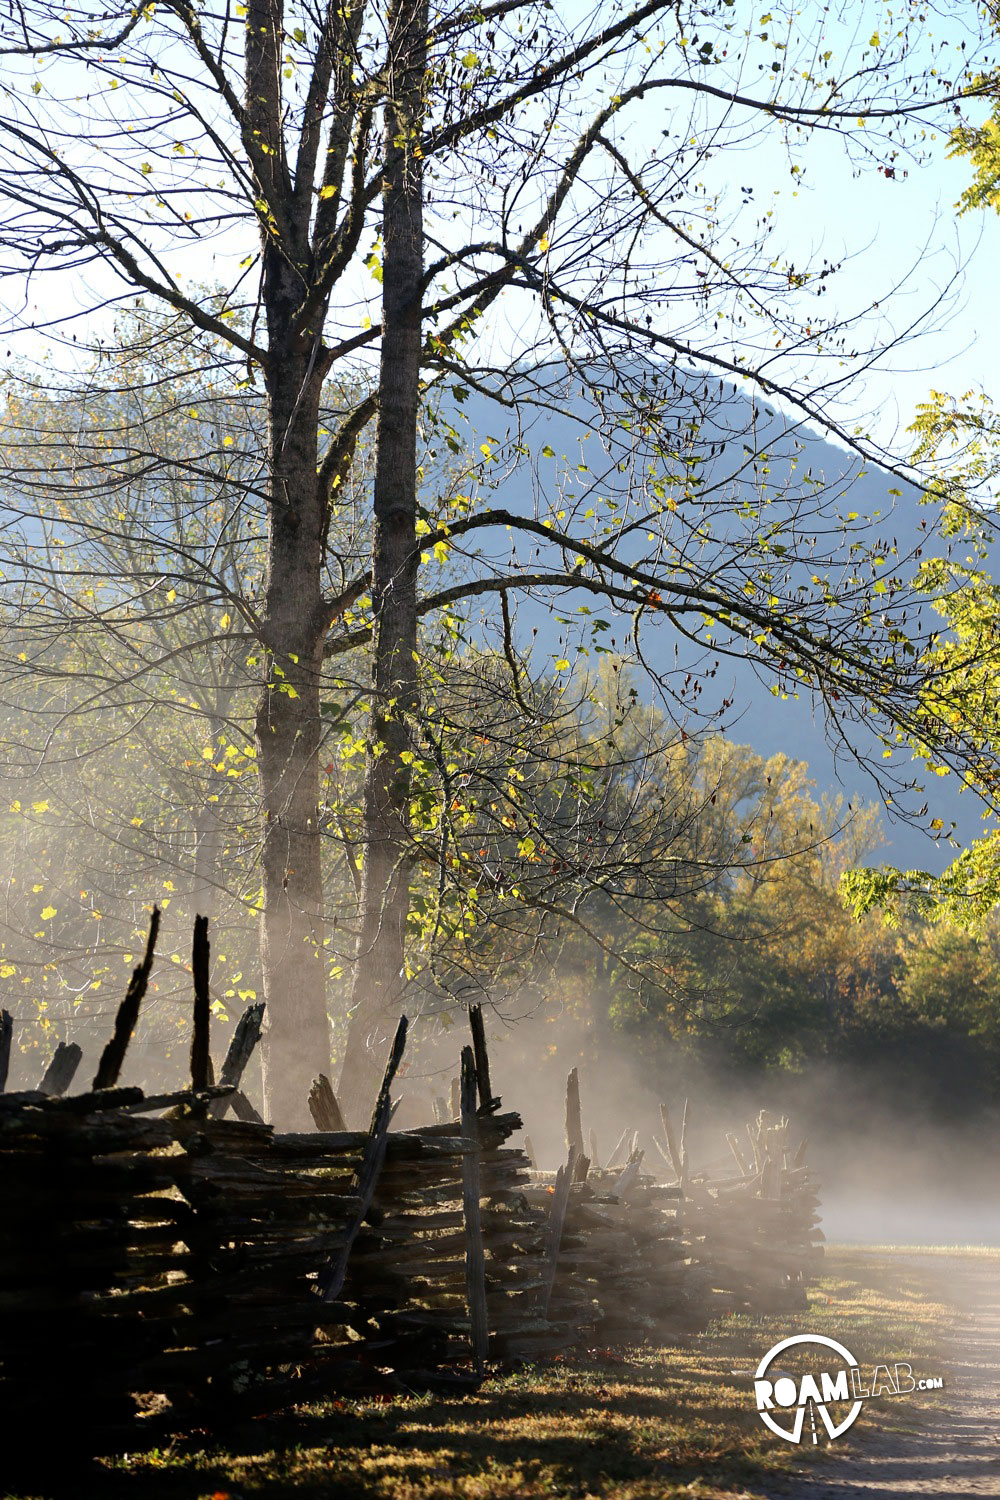 The dawn mist lay heavily over the Mountain Farm Museum in the Great Smoky Mountains National Park